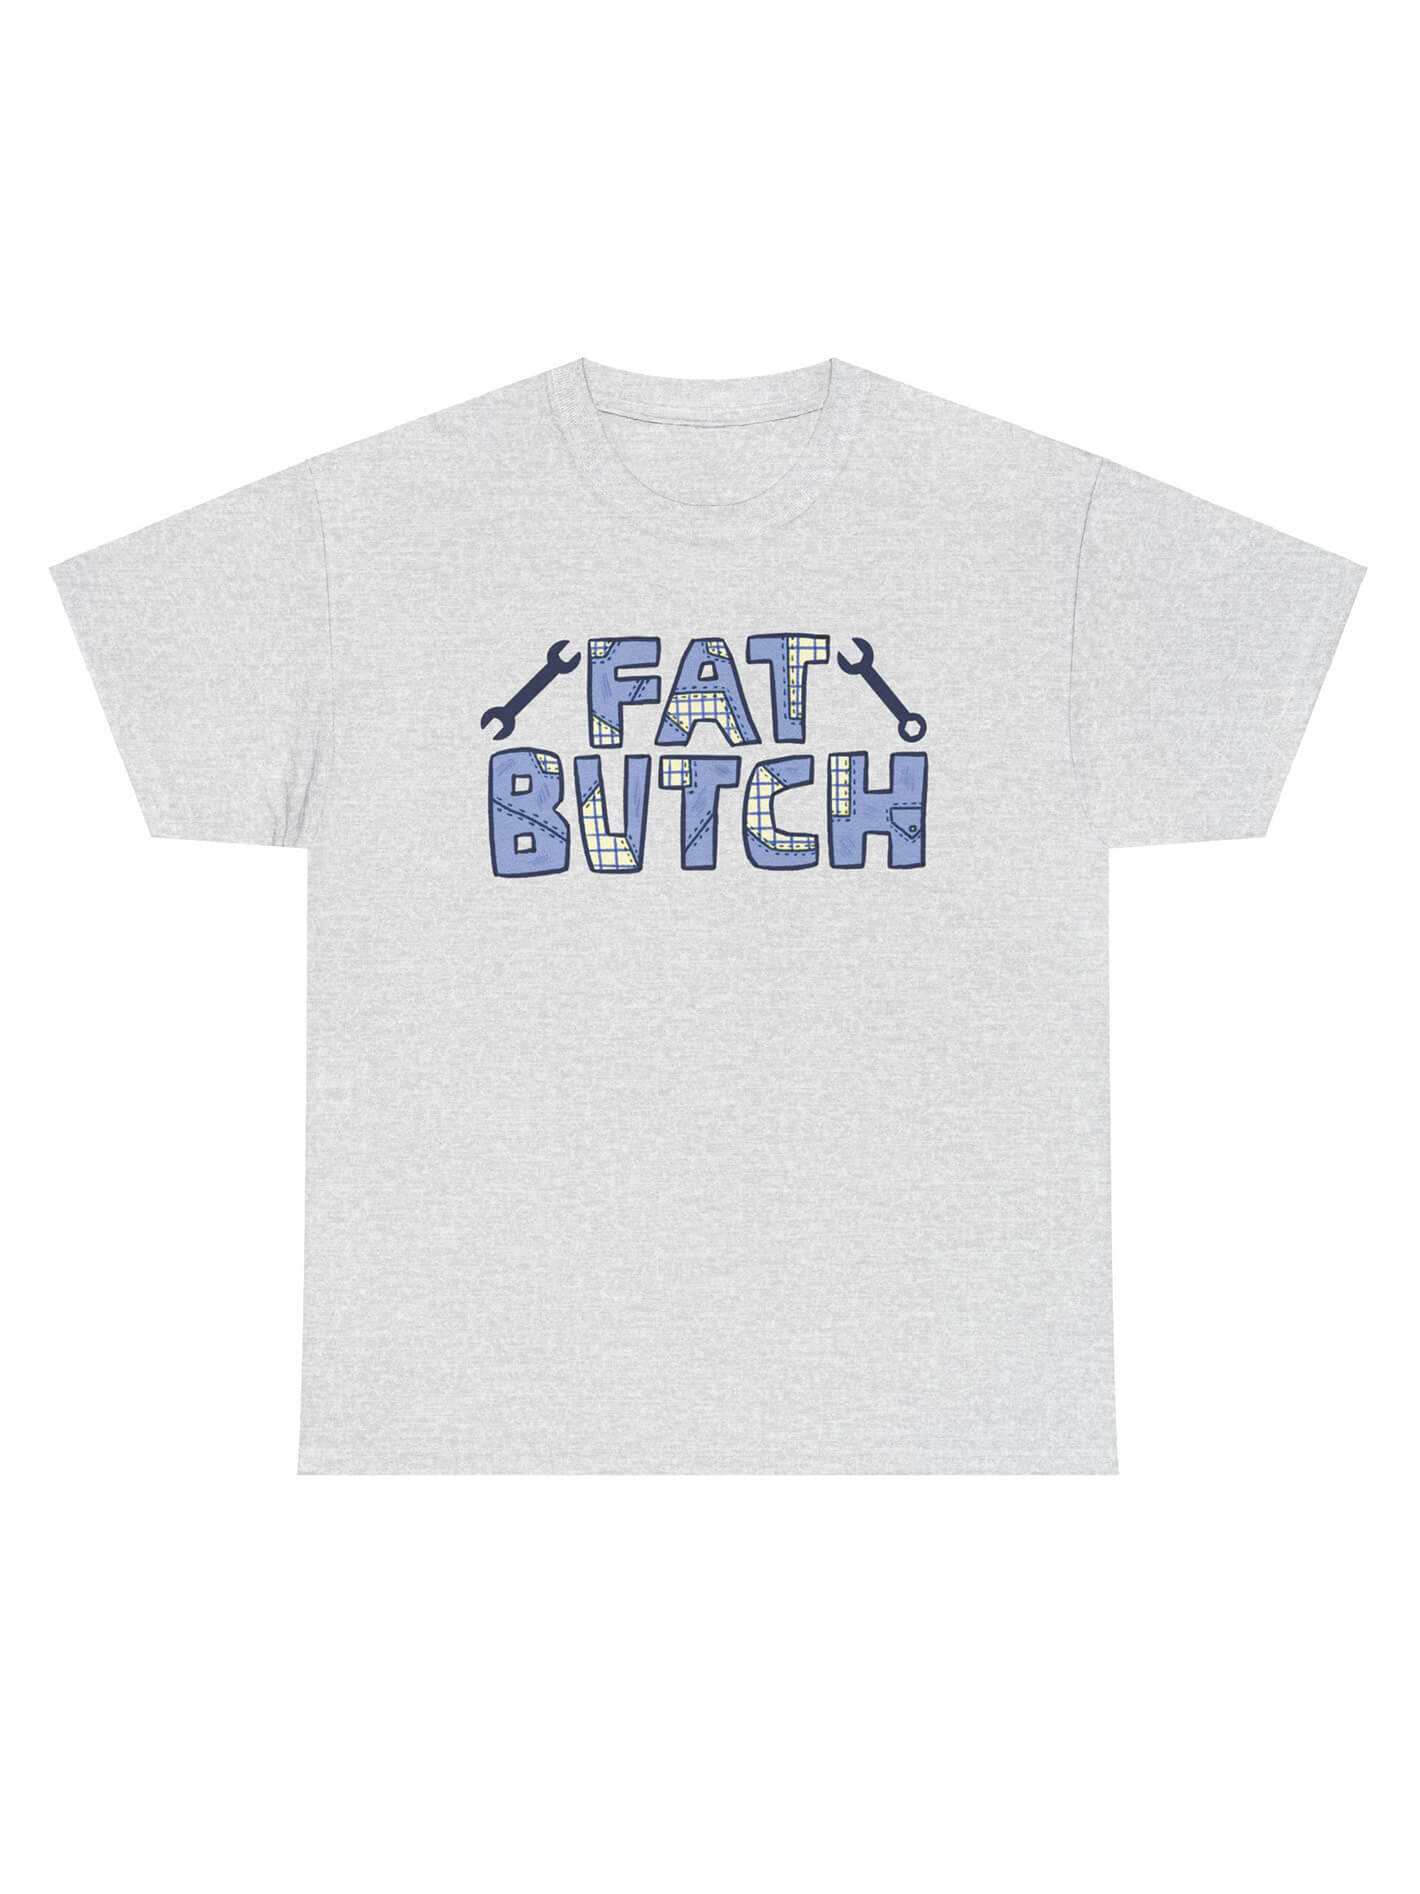 Fat butch queer graphic tee.